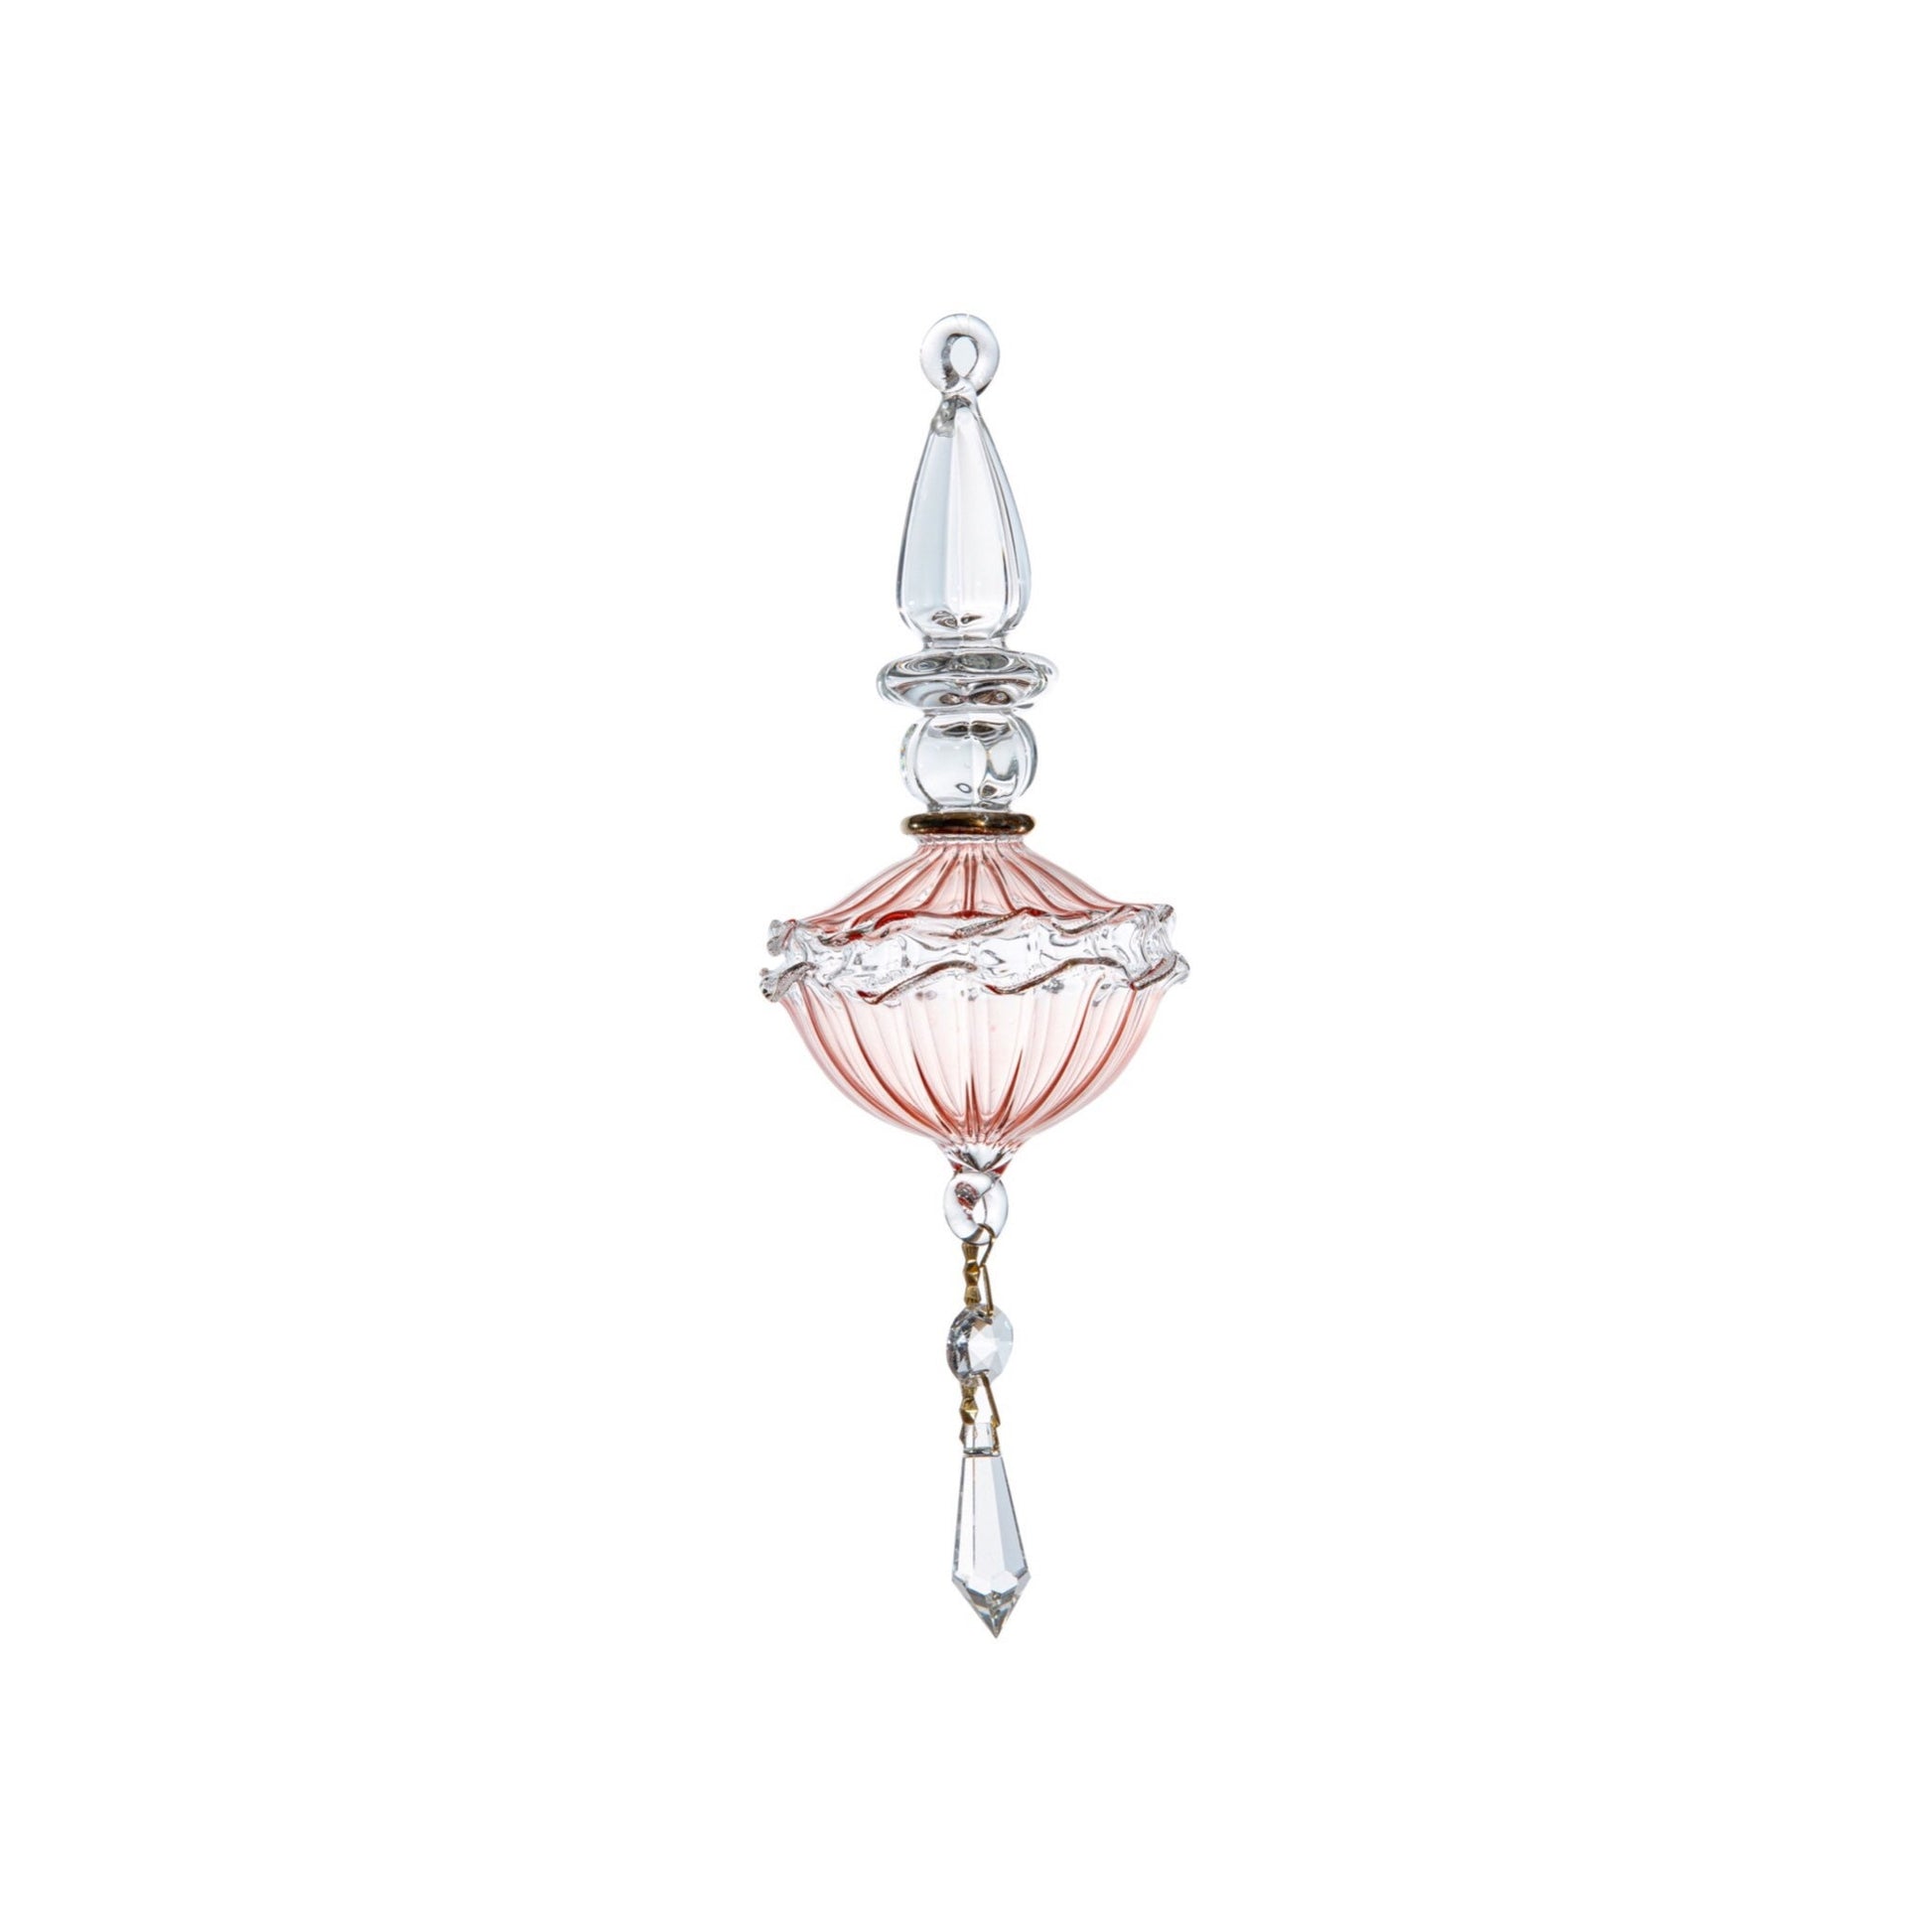 Blush Pink Christmas Ornament With 14K Gold - Les Trois Pyramides